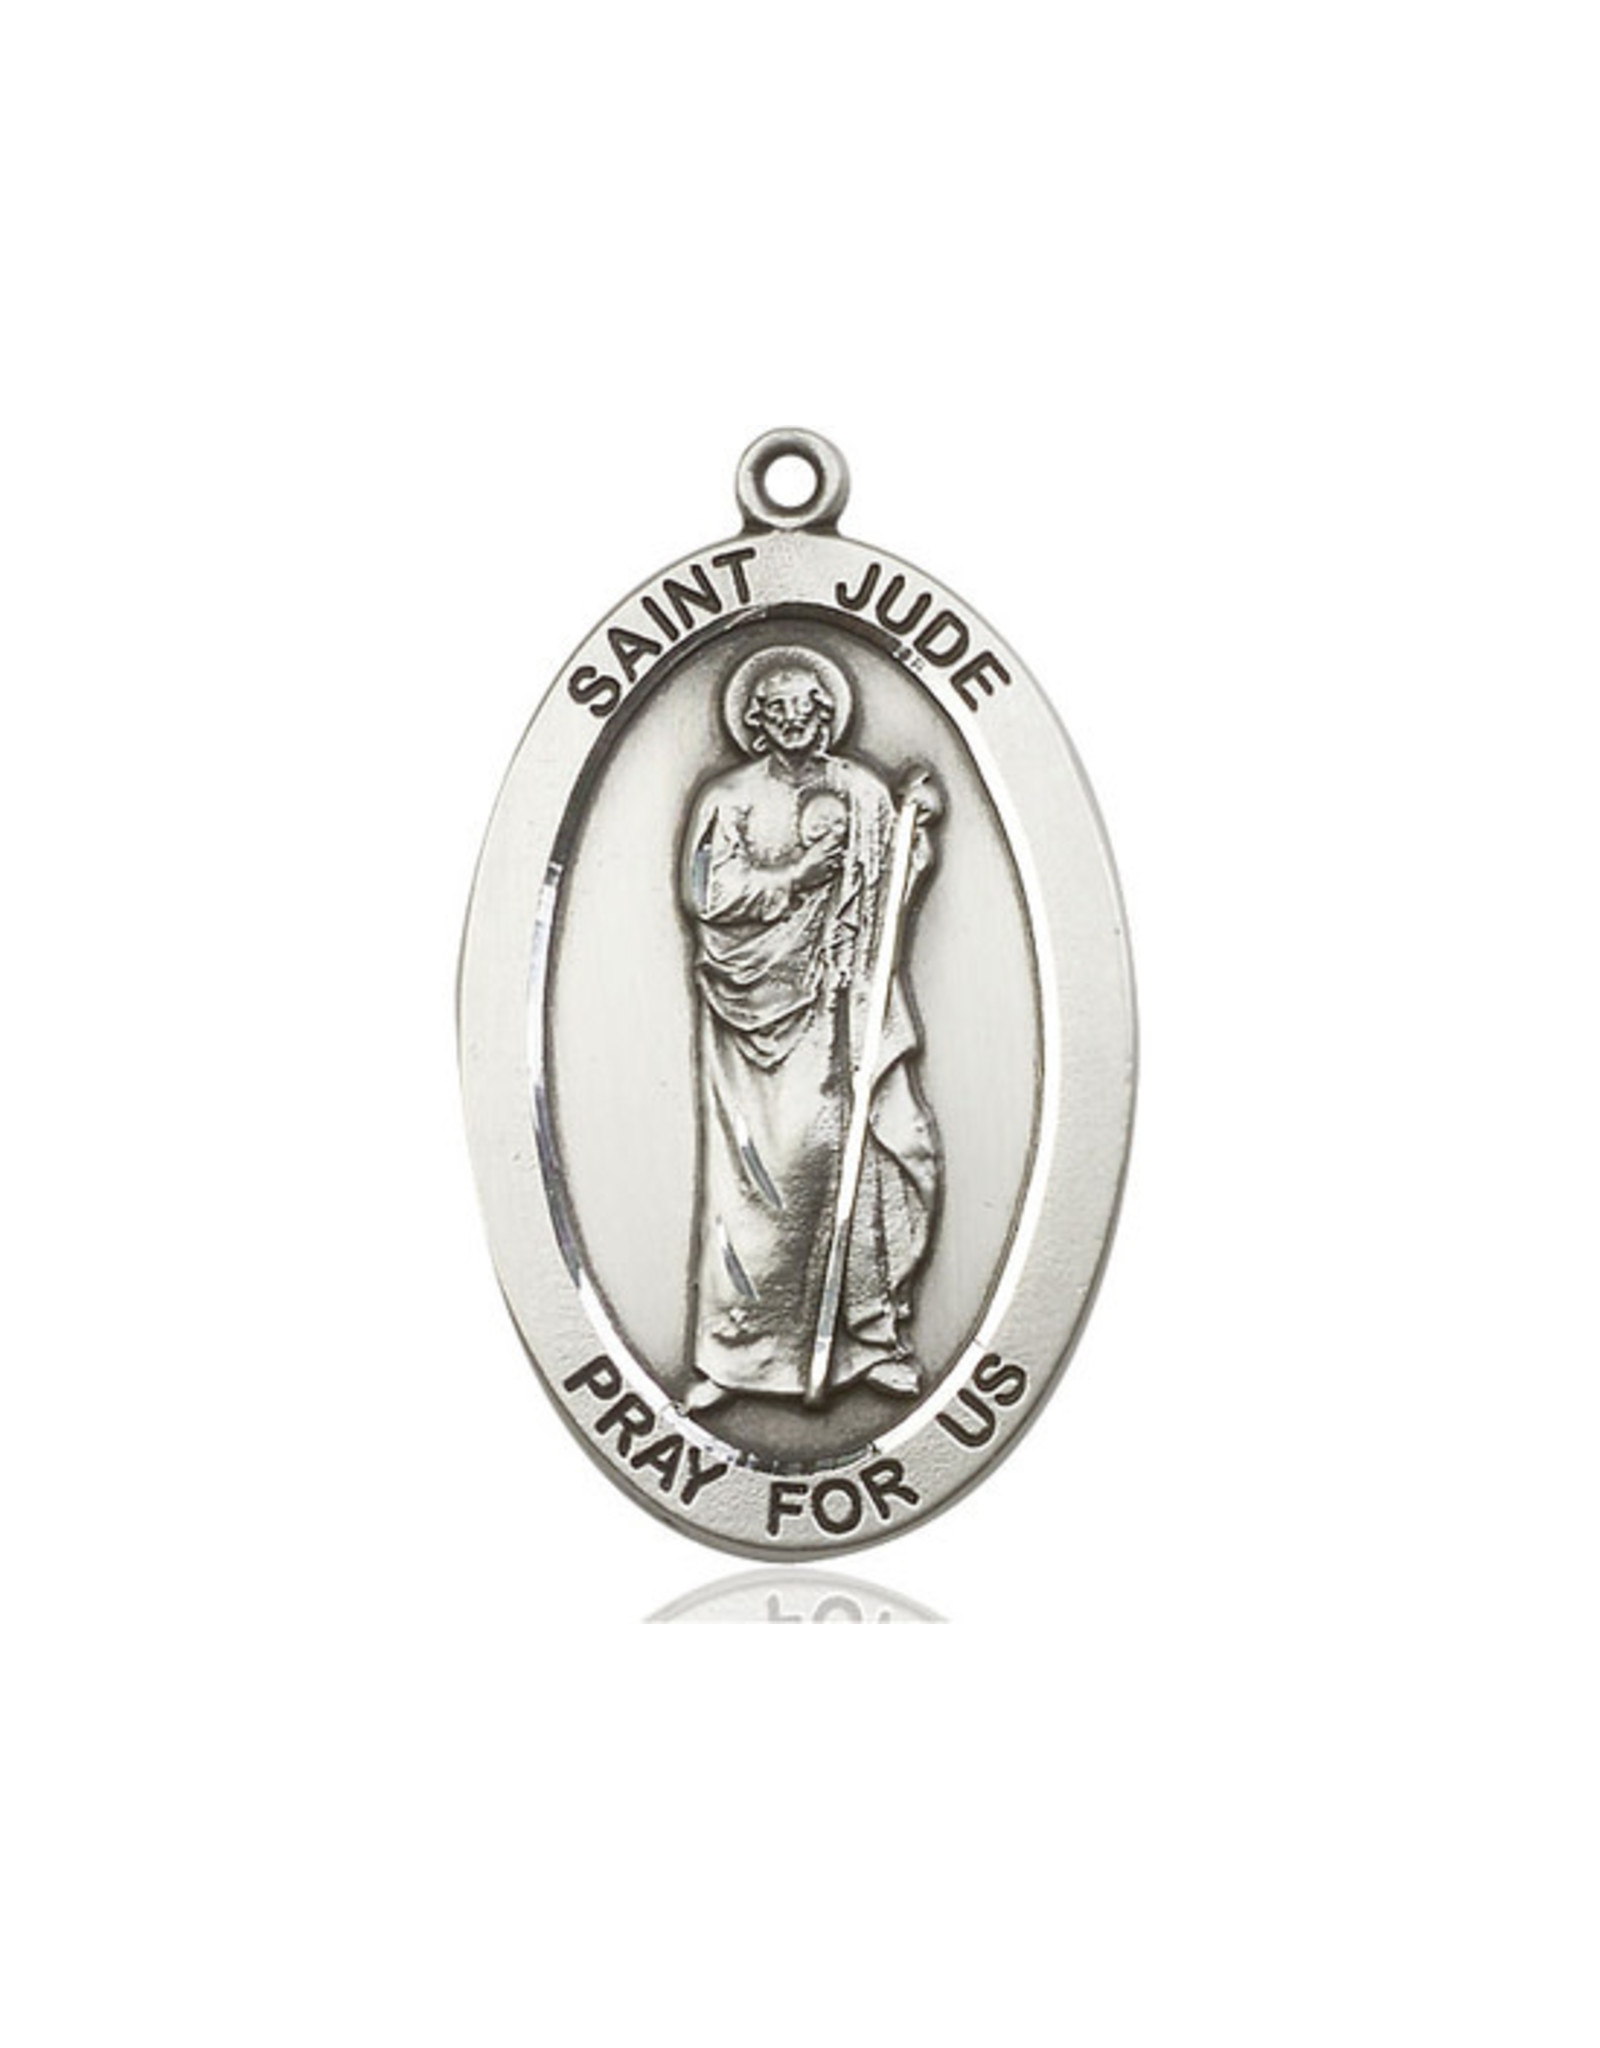 Bliss St. Jude Medal - Sterling Silver, Oval, Large